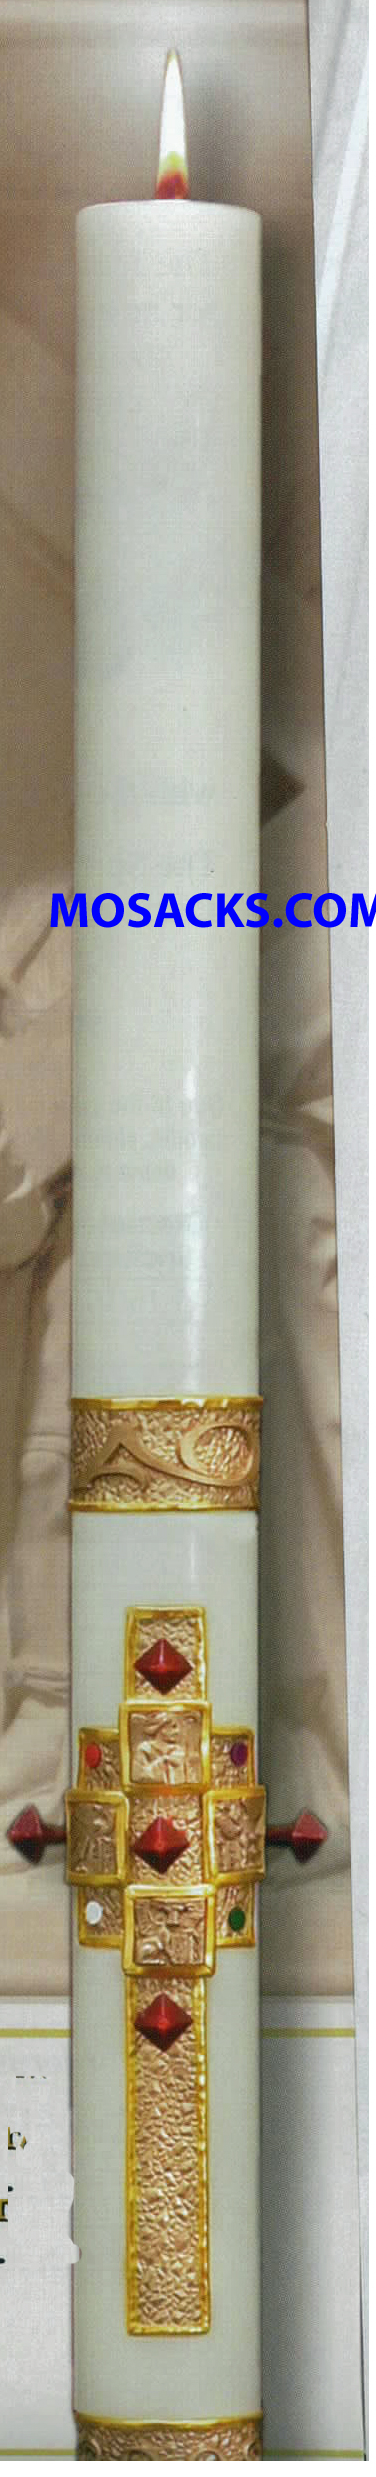 eximious® Beeswax Paschal Candle Evangelium™ by Cathedral Candle